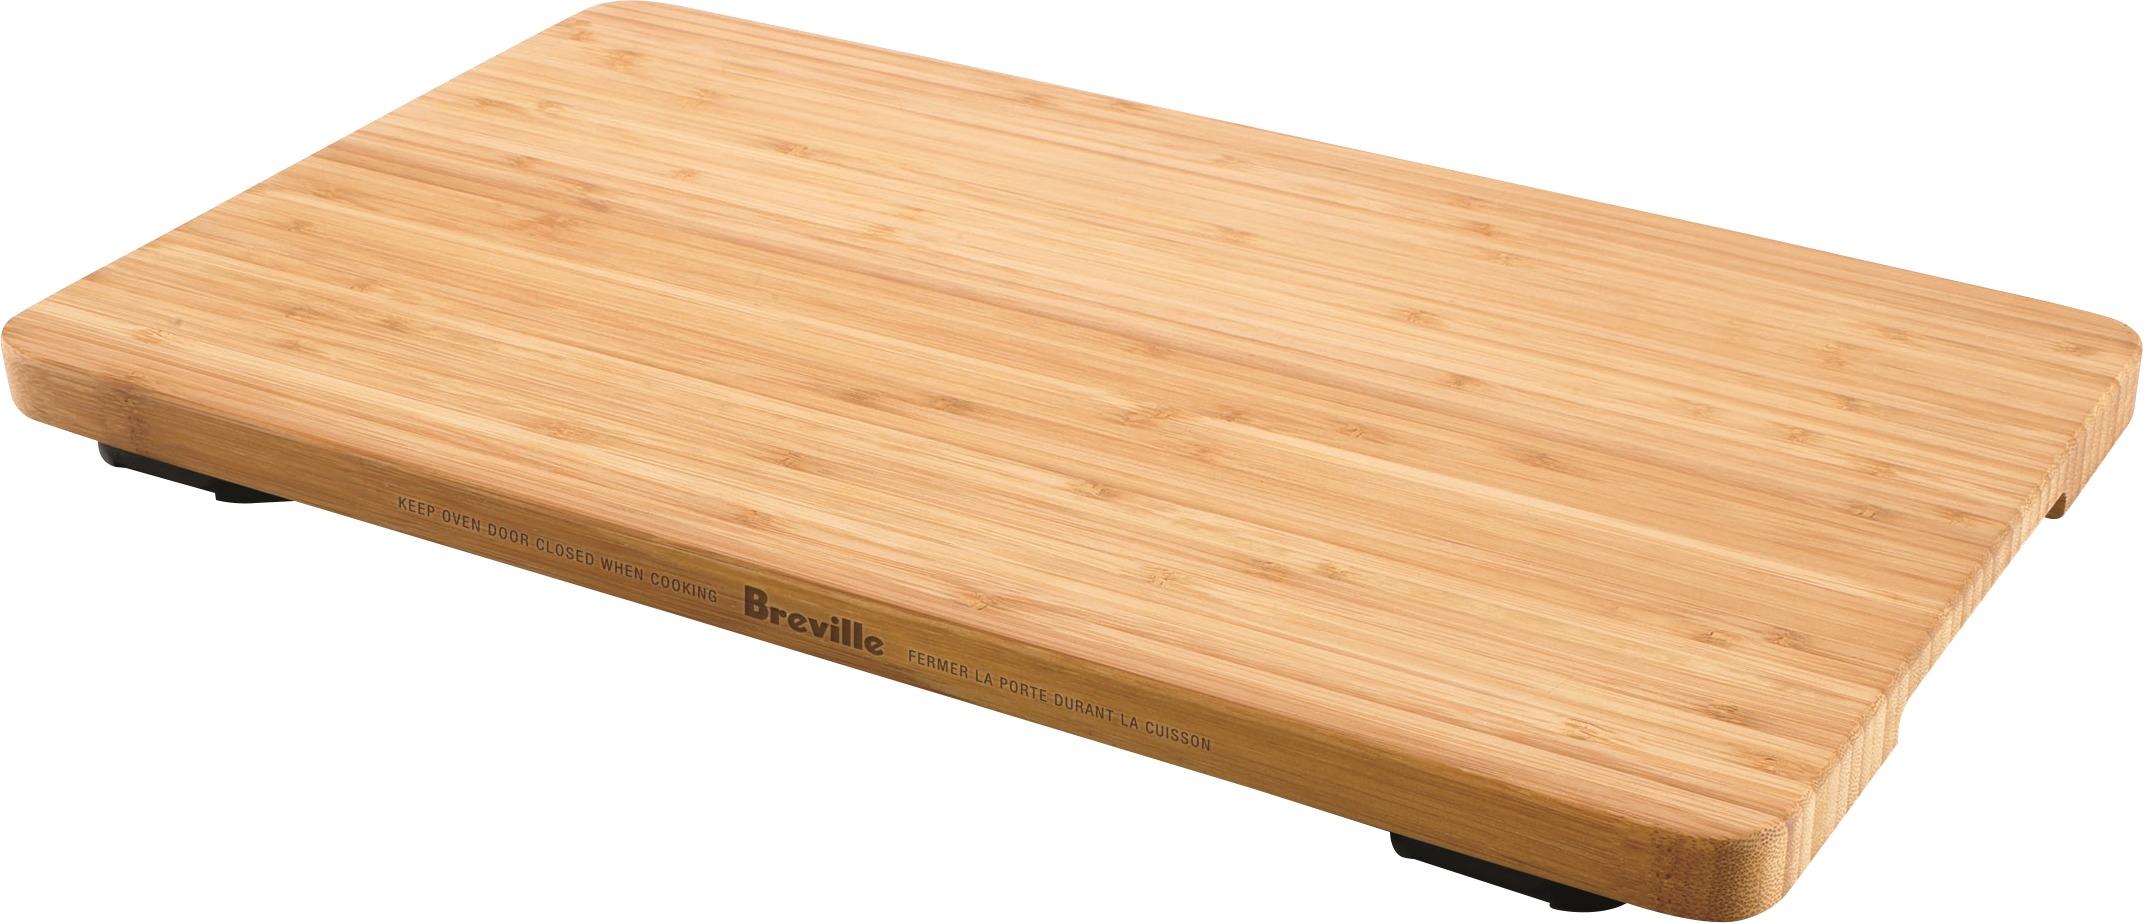 Angle View: Breville - Cutting Board for the Smart Oven Air - Bamboo